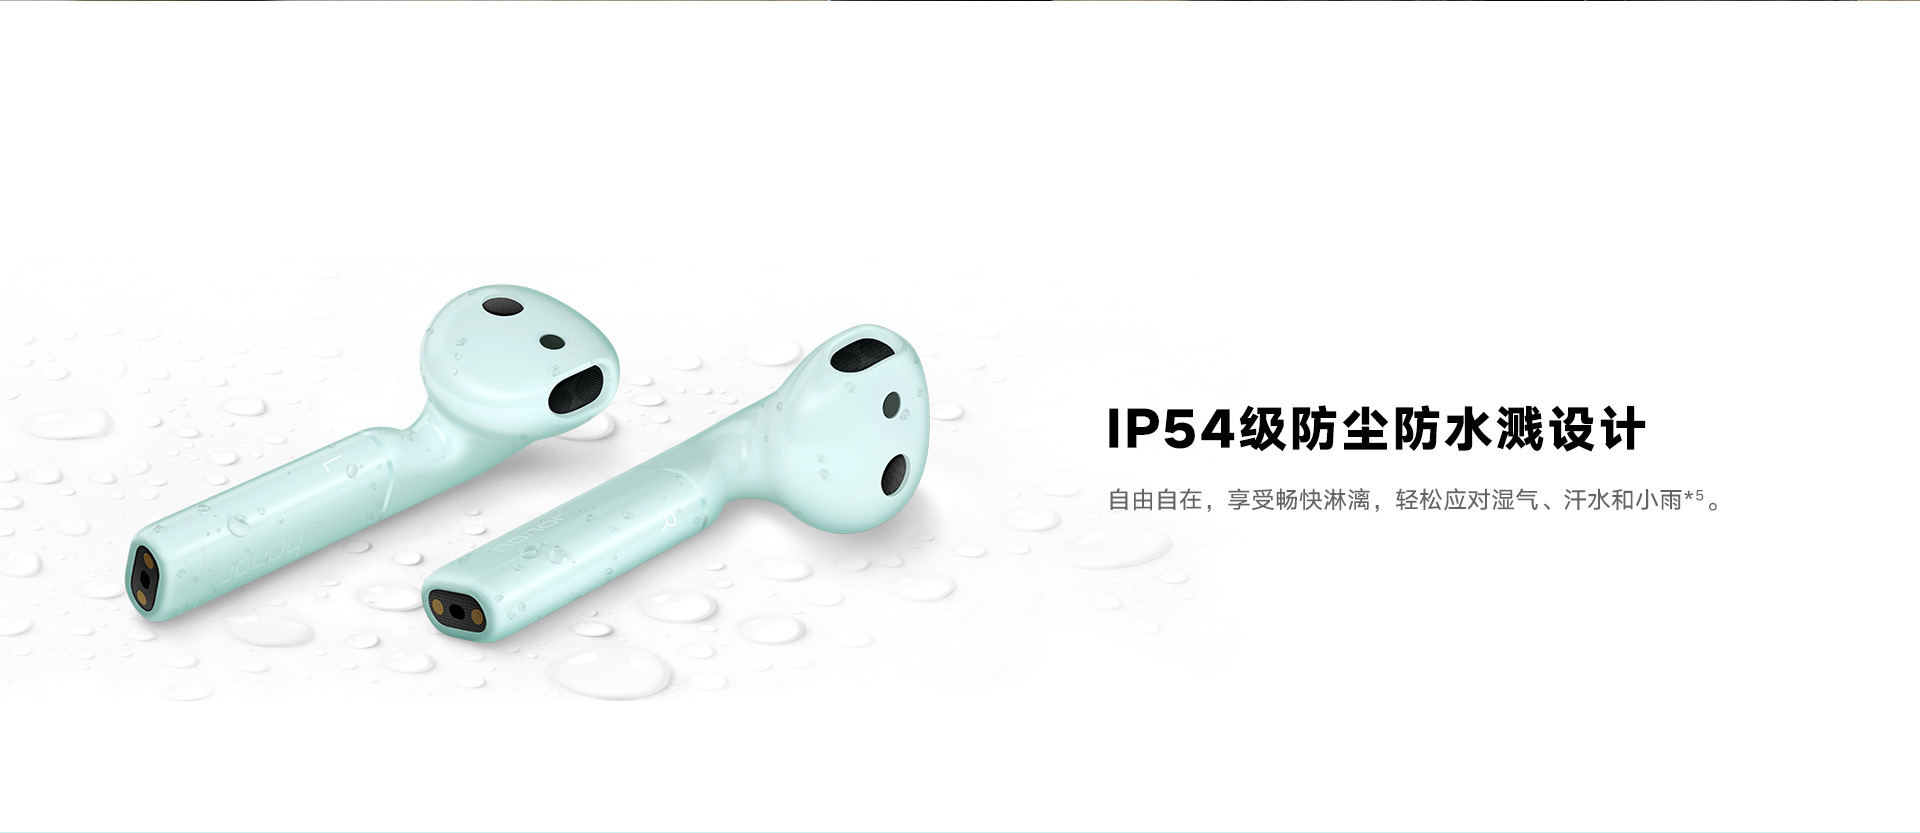 Honor FlyPods IP54 rating